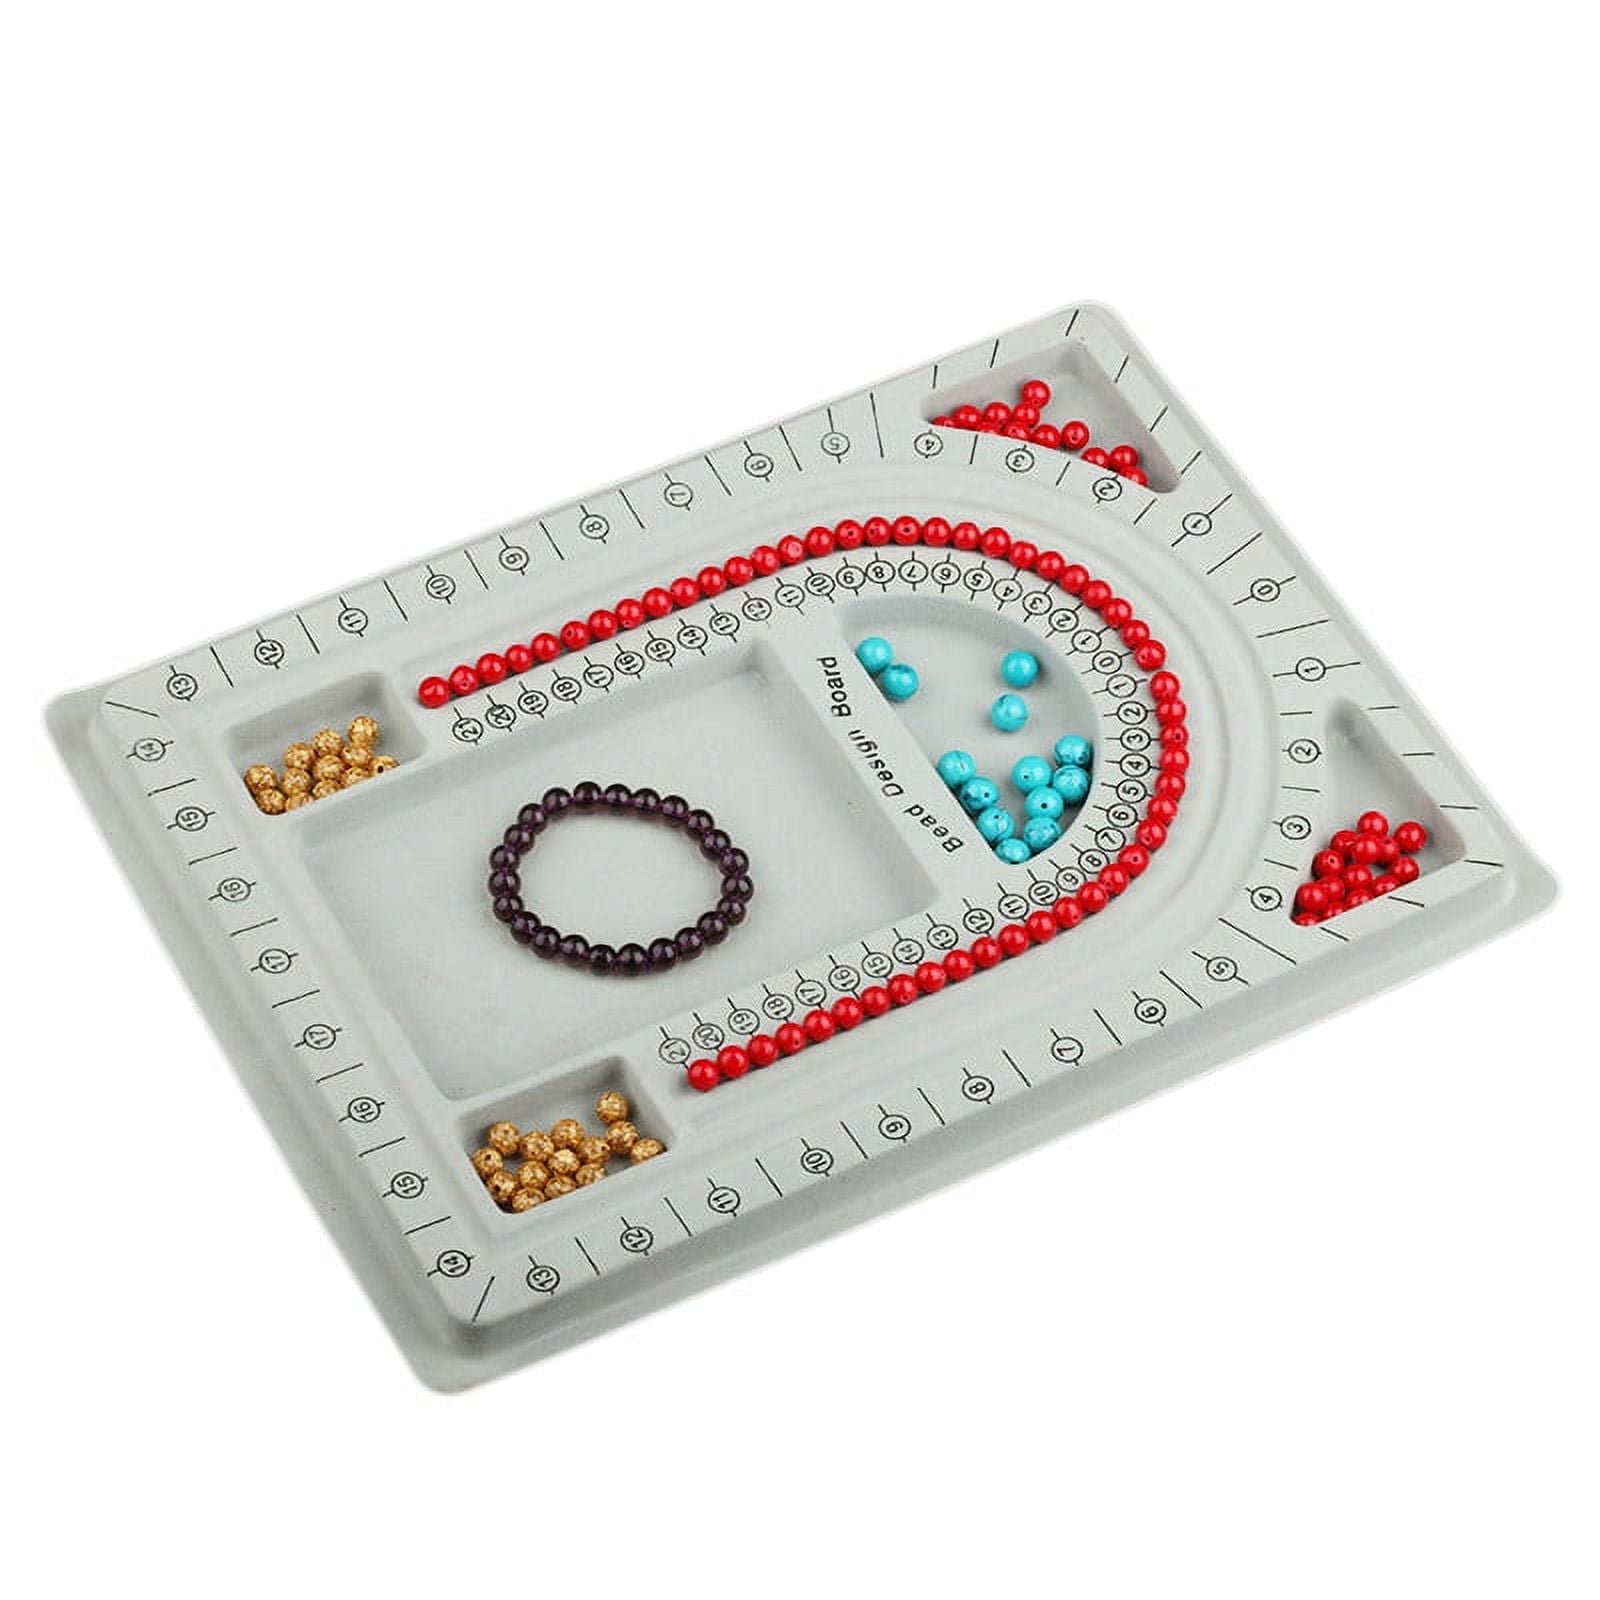 SUPVOX Necklace Beading Board DIY Jewelry Design Tray for Necklace Bracelet  Jewelry Making 2PCS